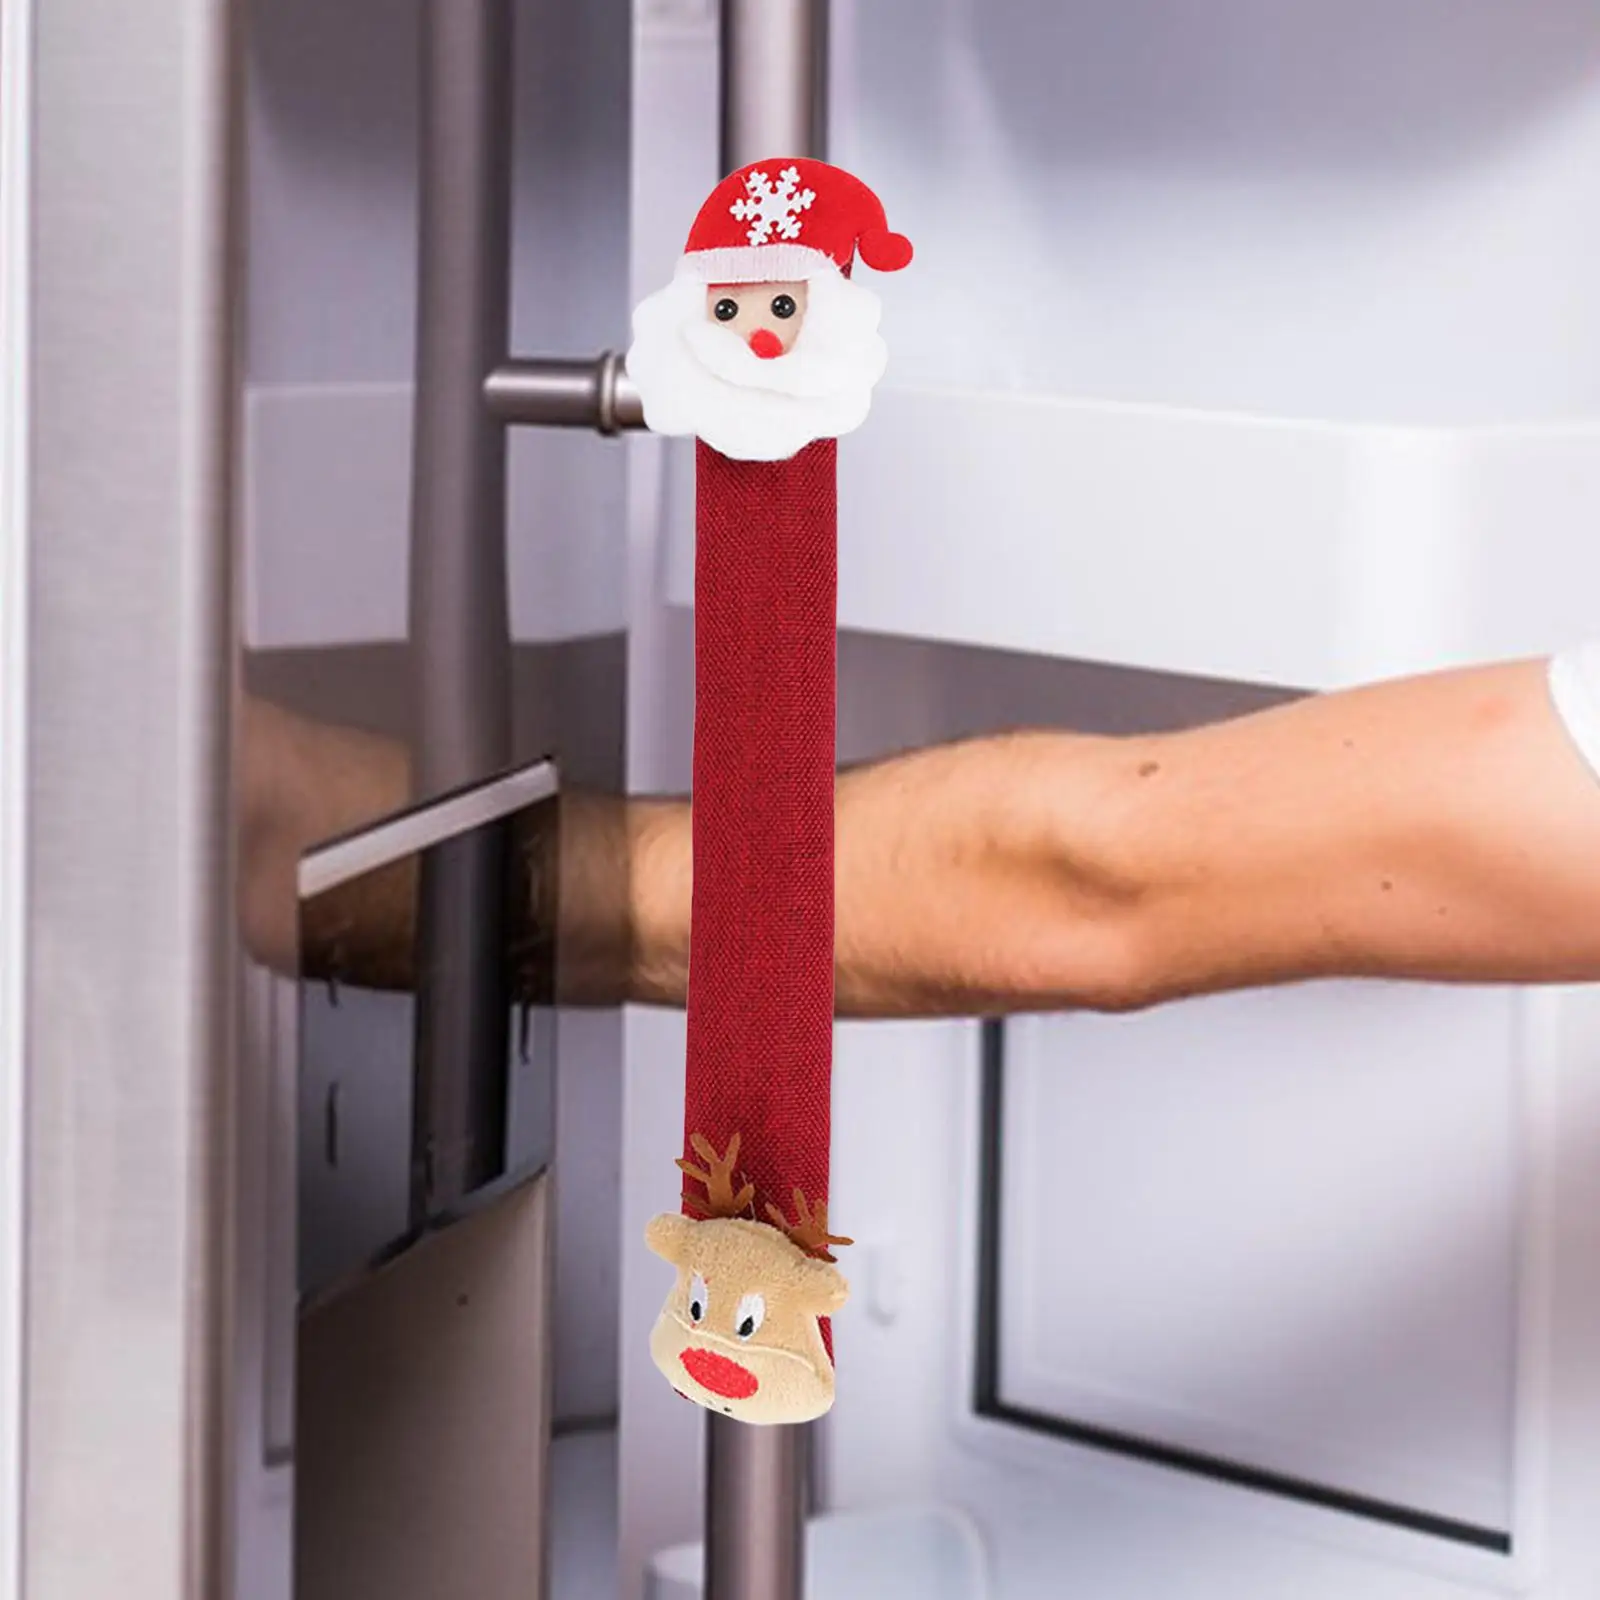 Christmas Refrigerator Door Handle Covers Holiday Decoration Door Pull Gloves for Home Fridge Christmas Oven Kitchen Appliances